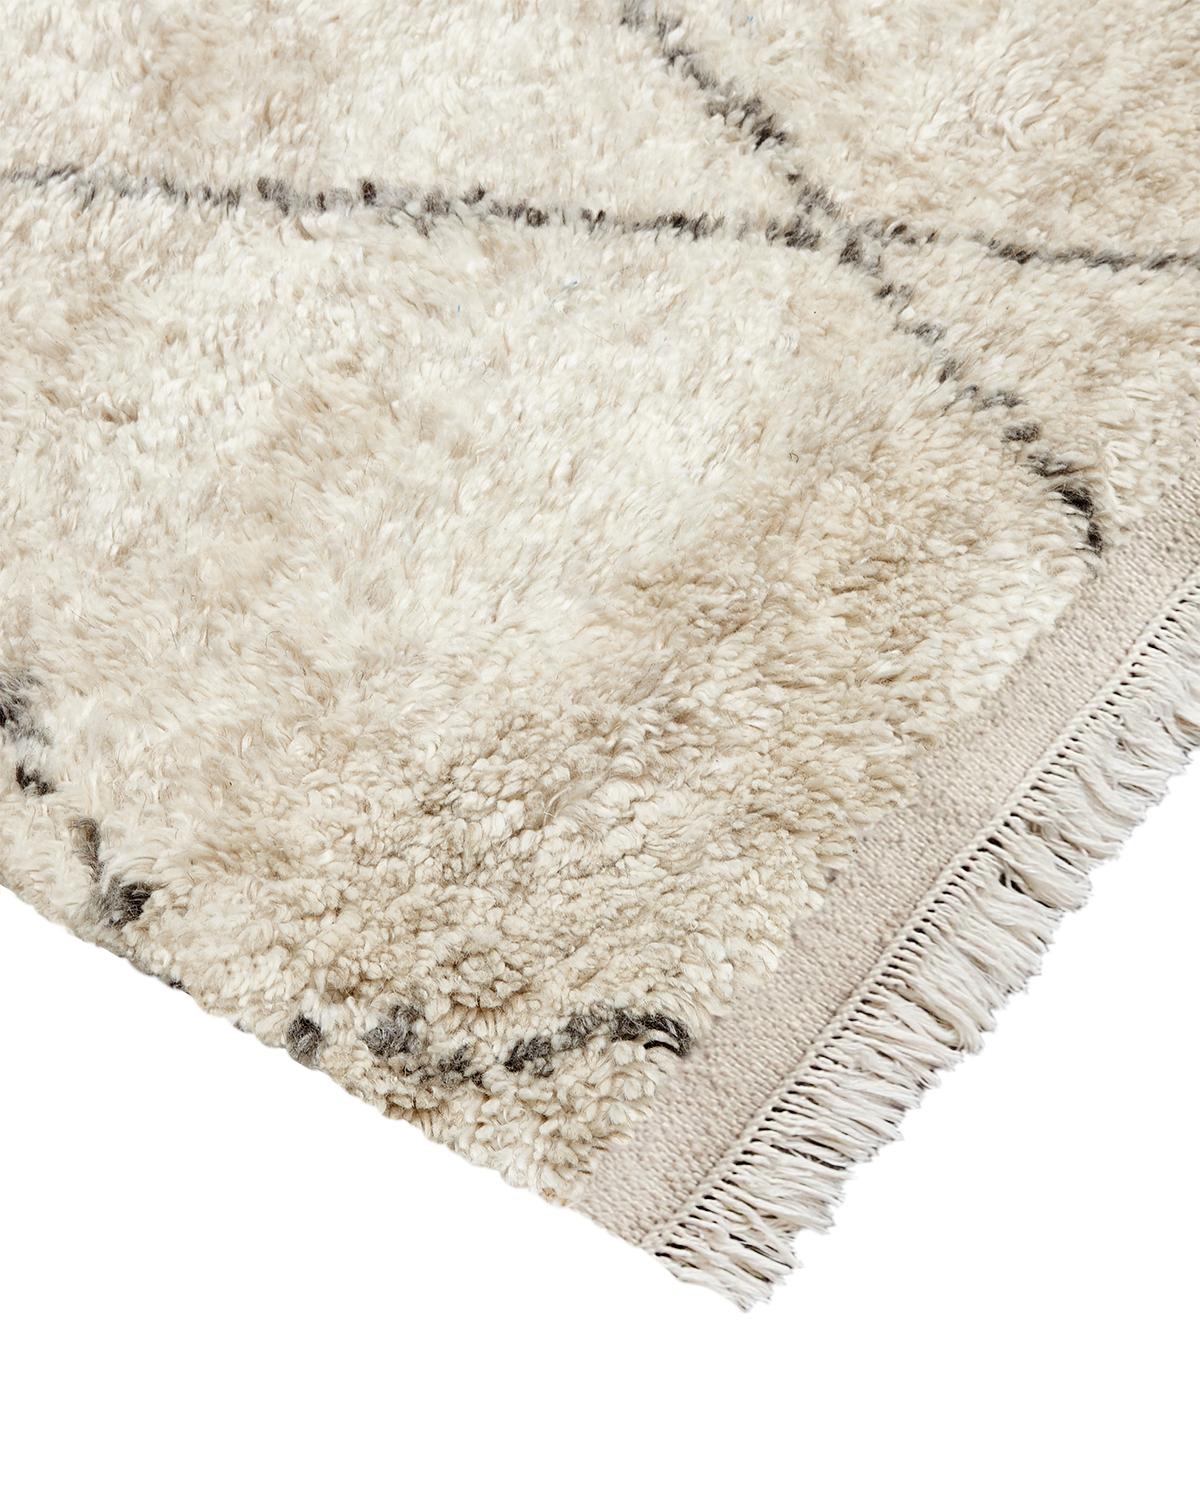 Handwoven in India of luxurious wool with designs inspired by centuries-old tribal motifs, the Shaggy Moroccan inspired collection includes rugs in neutral tones as well as vivacious palettes. Each rug will bring intriguing texture and aesthetic to